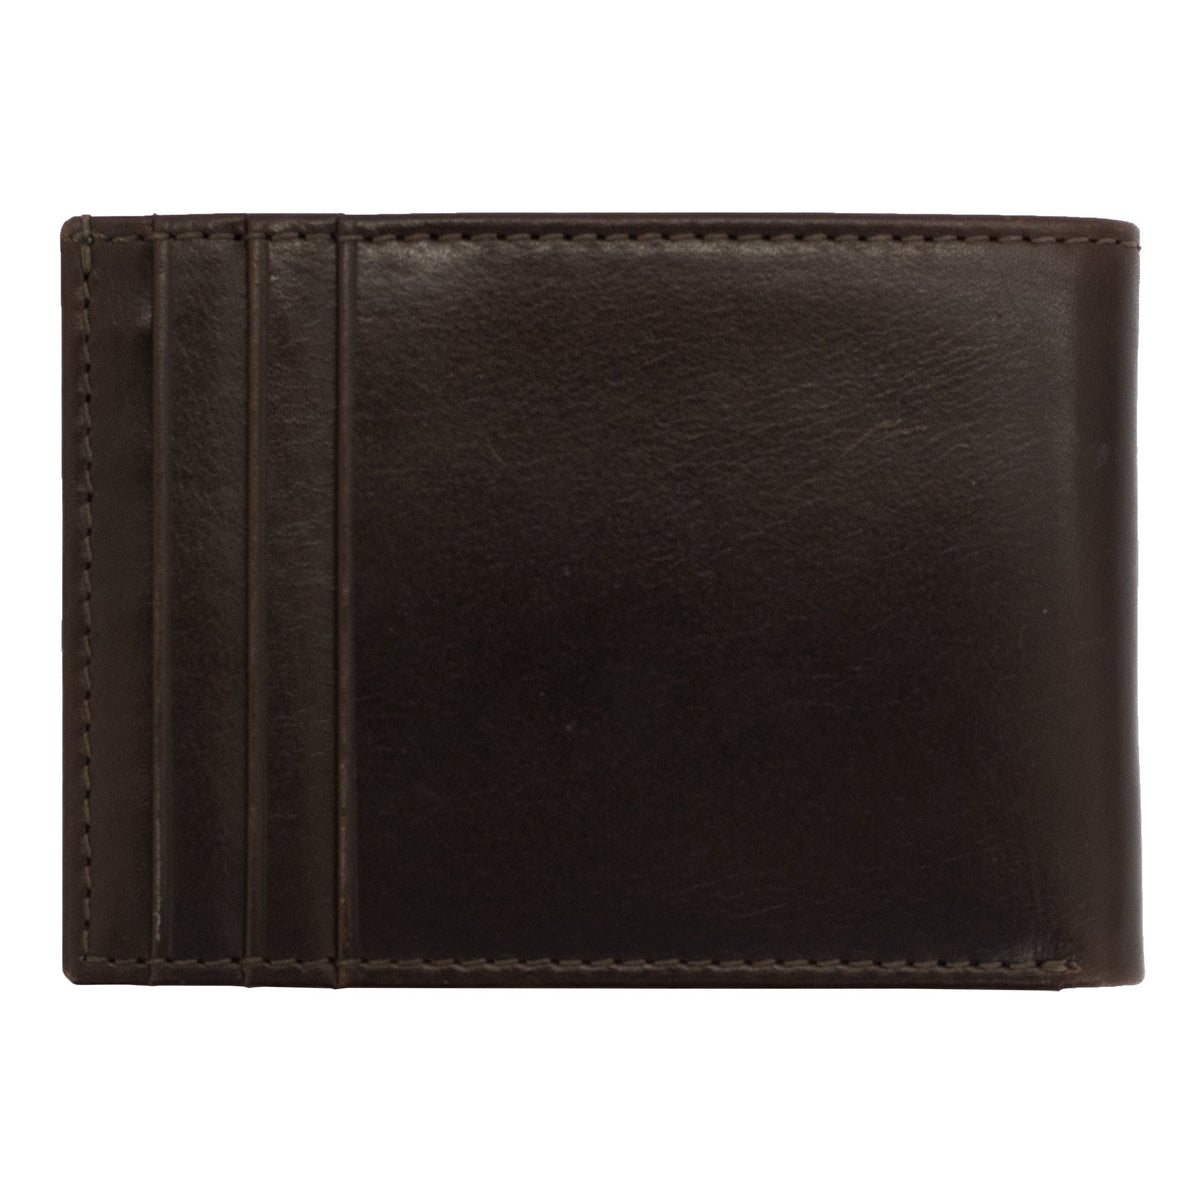 Smith & Wesson Front Pocket Wallet – RuggedRare